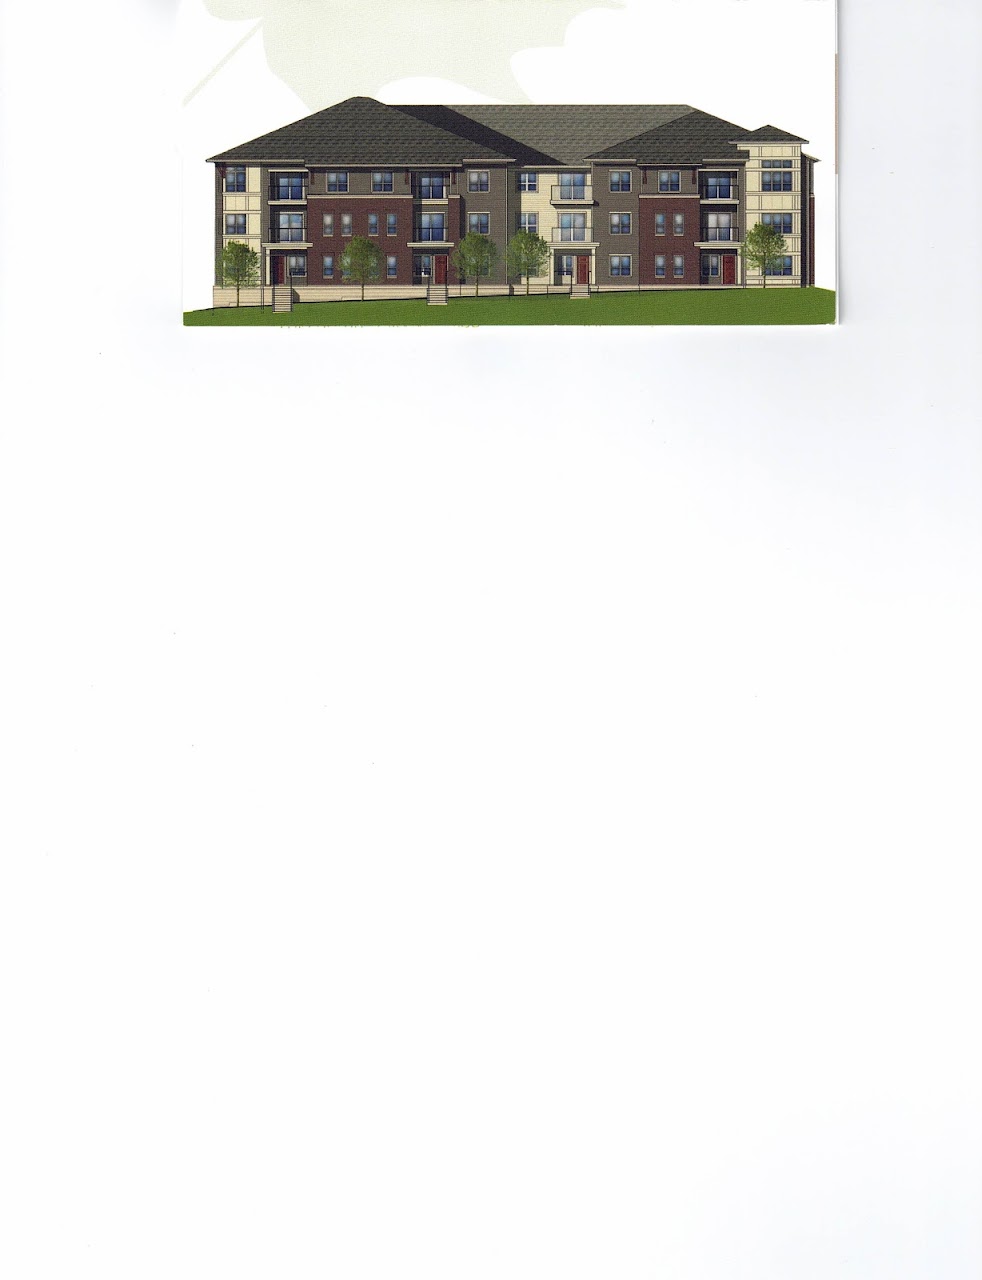 Photo of MAPLE GROVE COMMONS. Affordable housing located at 3204 GOLDEN COPPER LANE MADISON, WI 53719